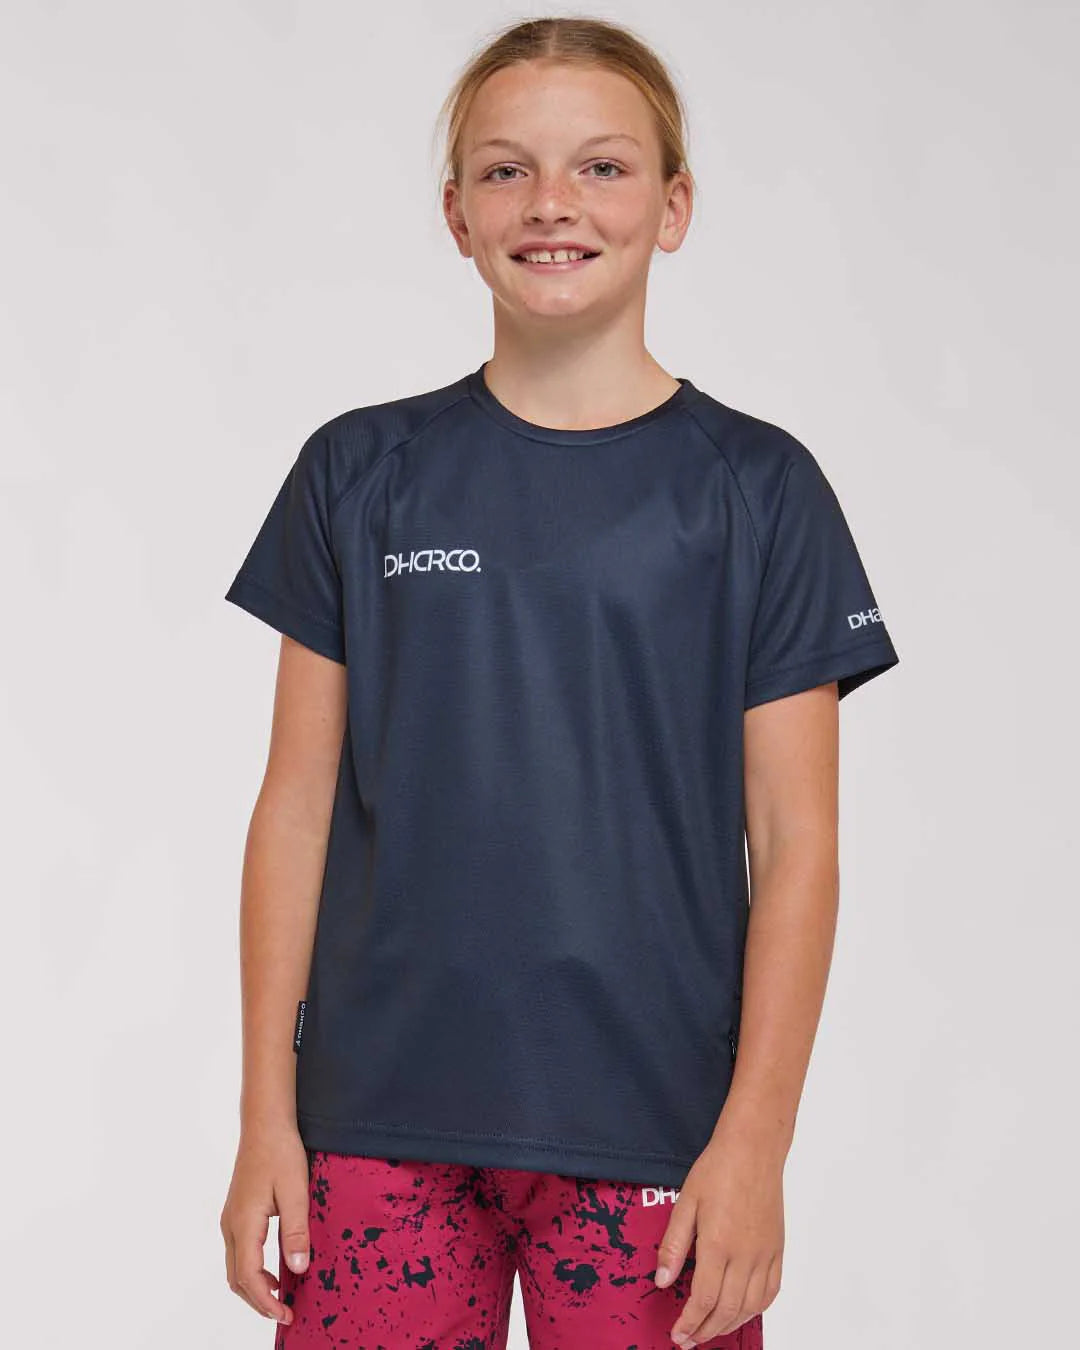 Dharco Youth Short Sleeve Jersey